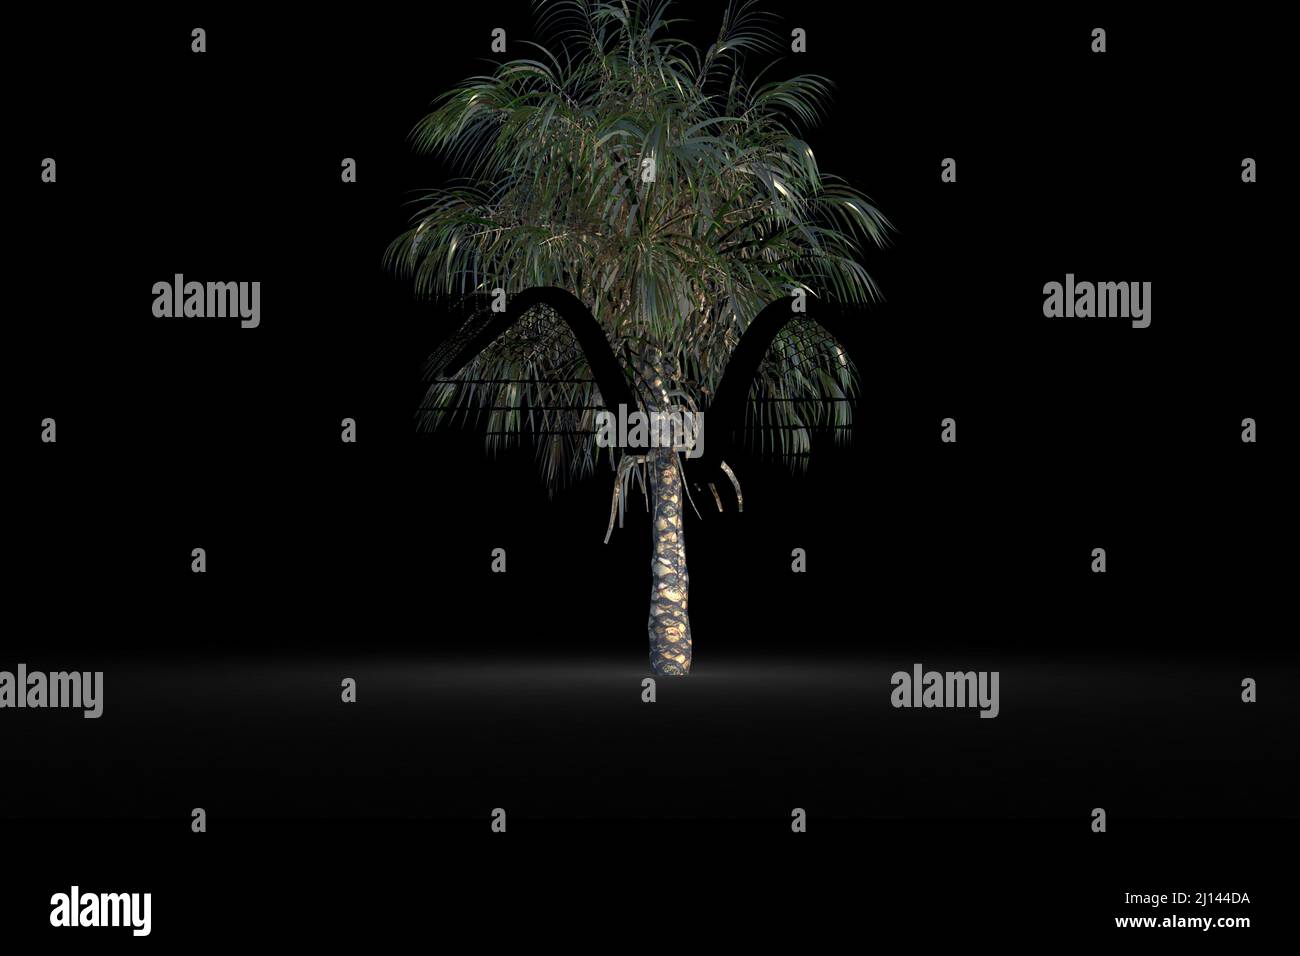 Barbed wire over silhouette of palm tree against black background Stock Photo